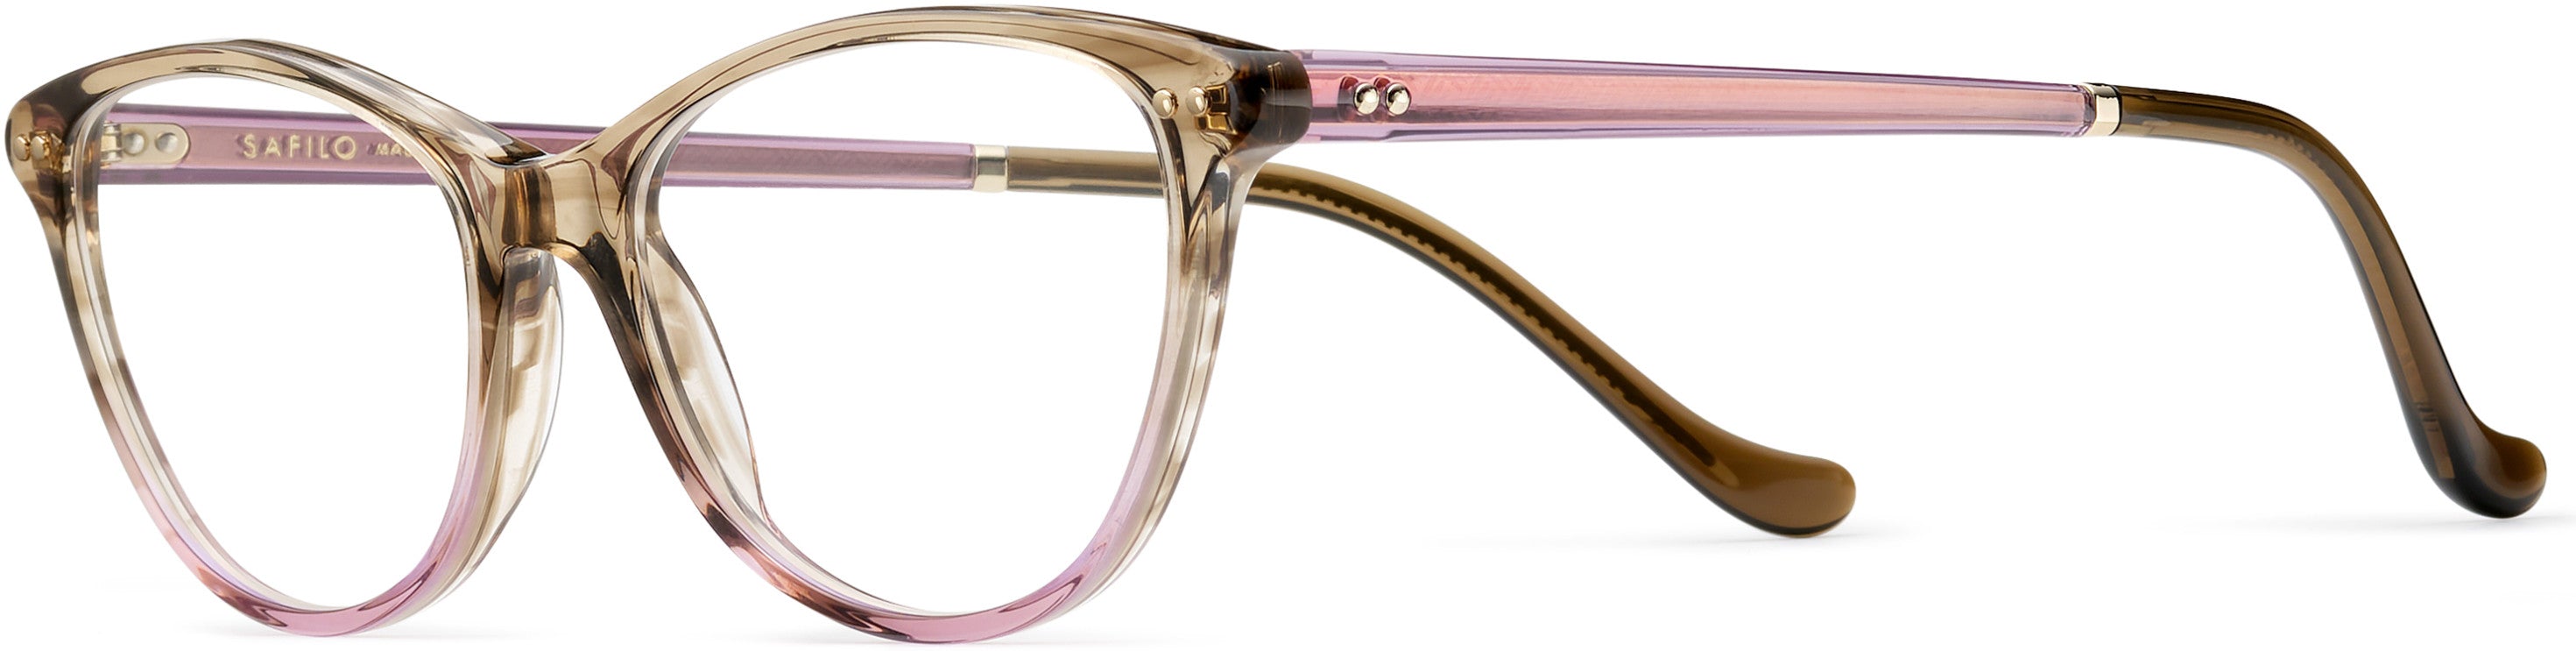 Safilo 2.0 Tratto 09 Cat Eye/butterfly Eyeglasses 0AFO-0AFO  Brown Violet Brown (00 Demo Lens)